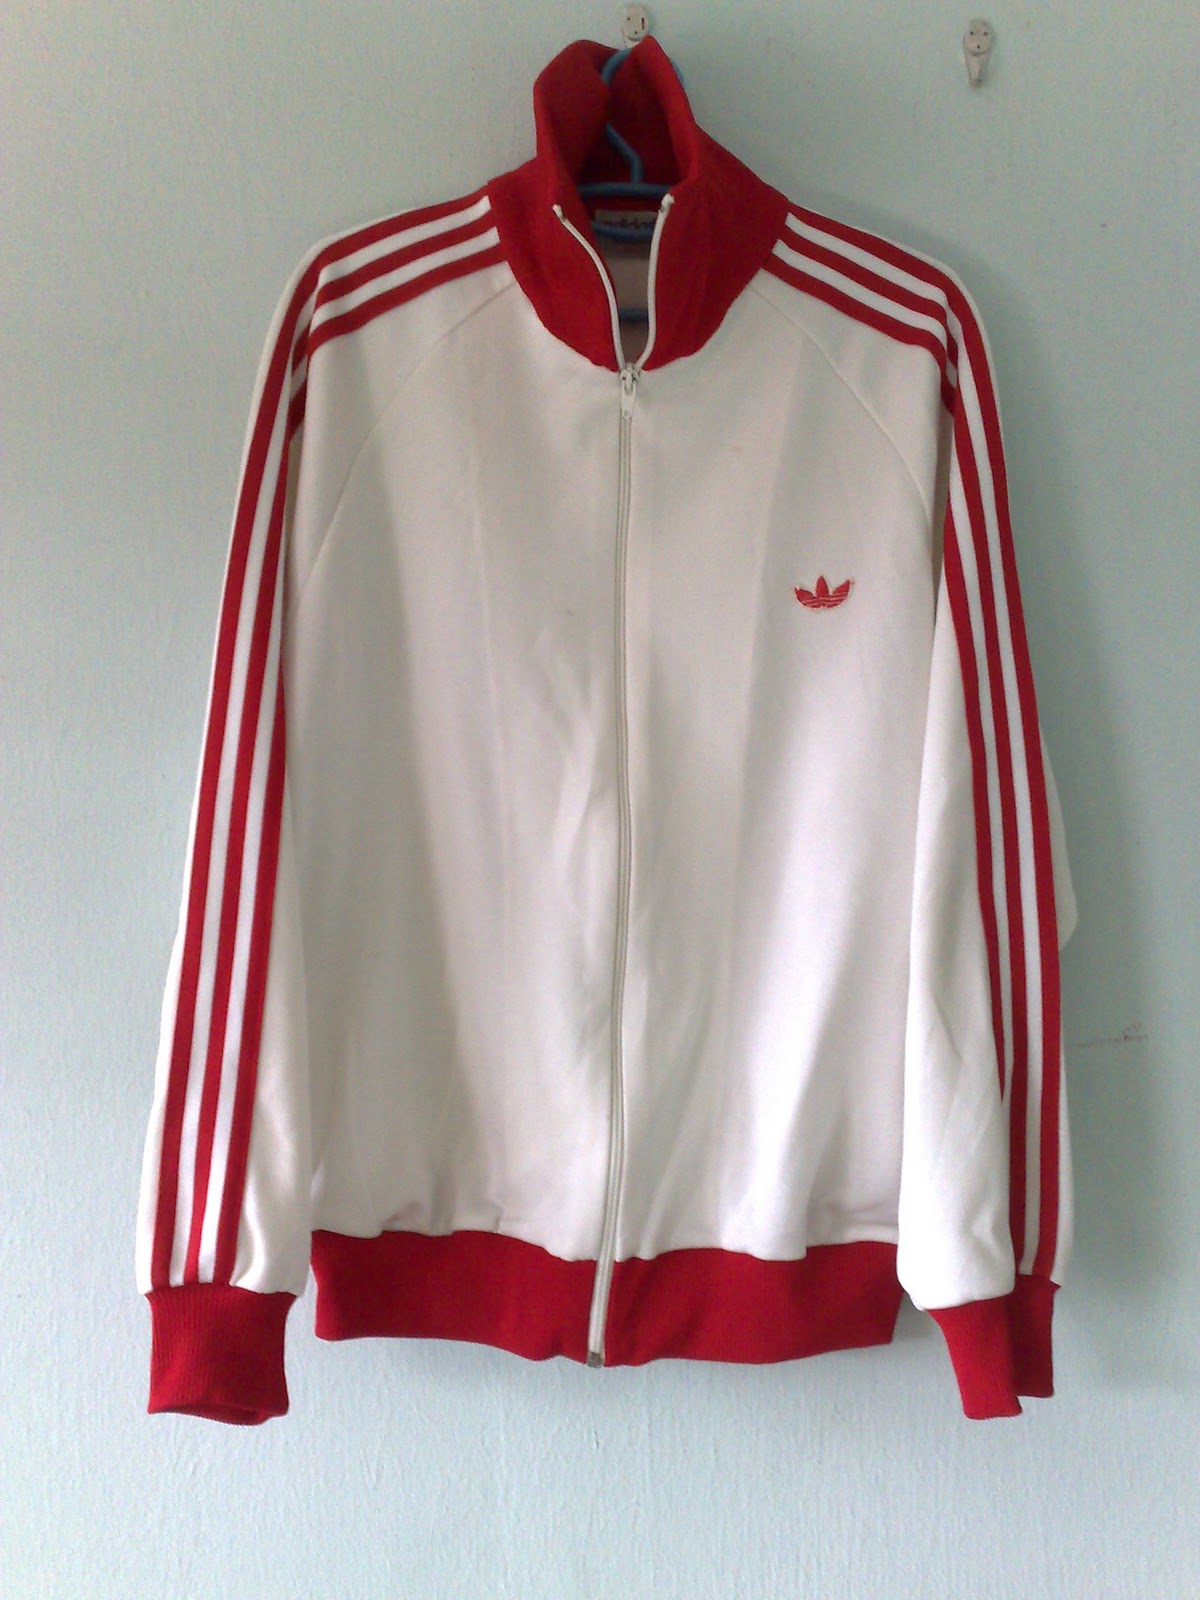 rzlbundle: adidas sweater red and white vintage